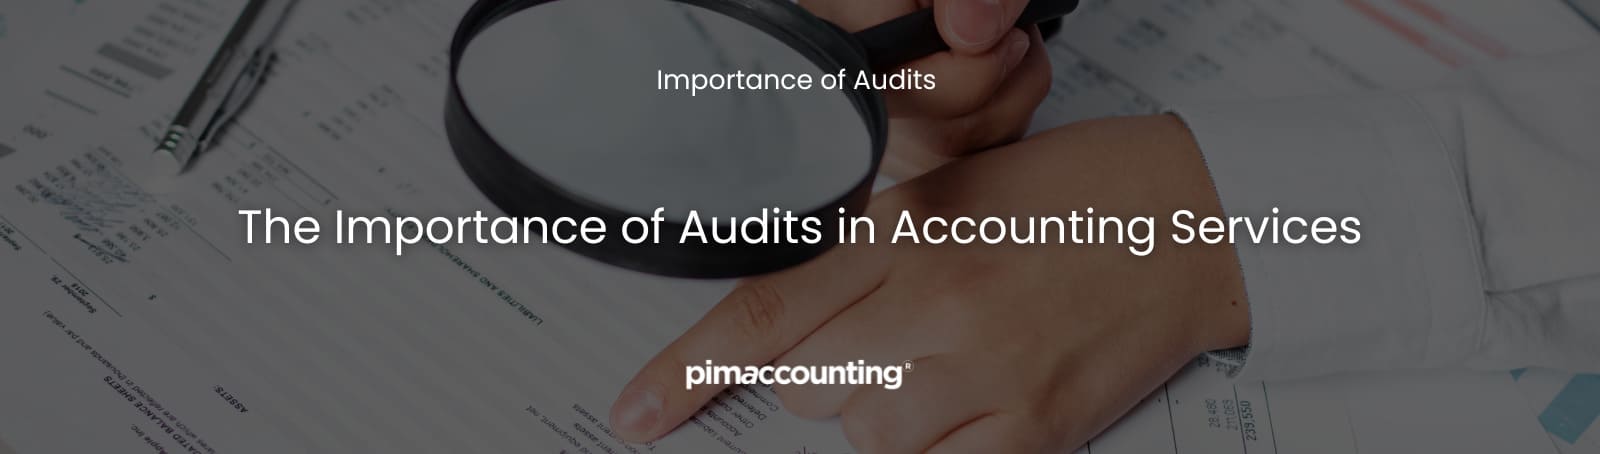 The Importance of Audits in Accounting Services